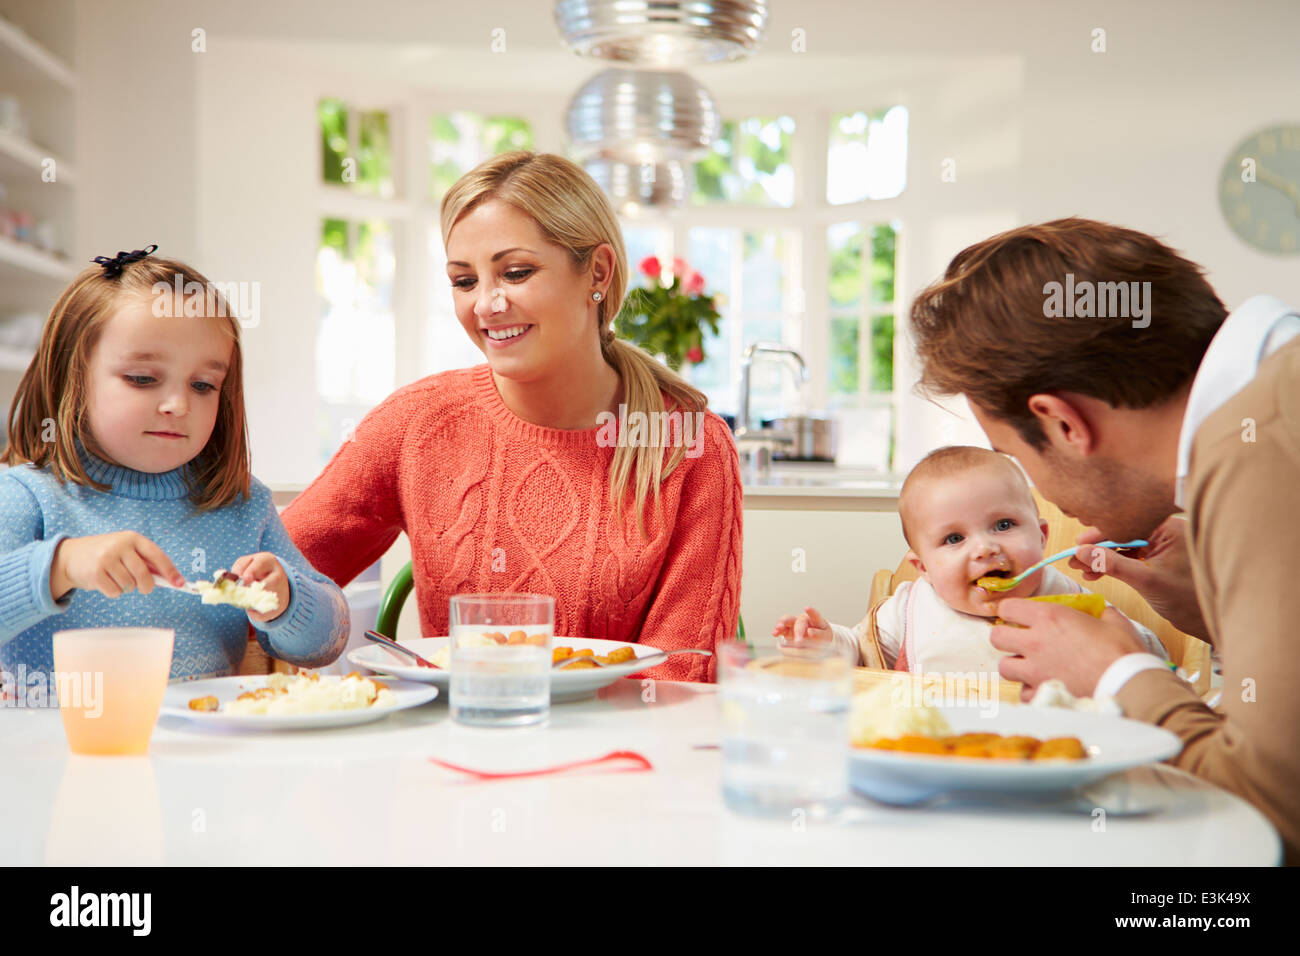 Family With Young Baby Eating Meal At Home Stock Photo